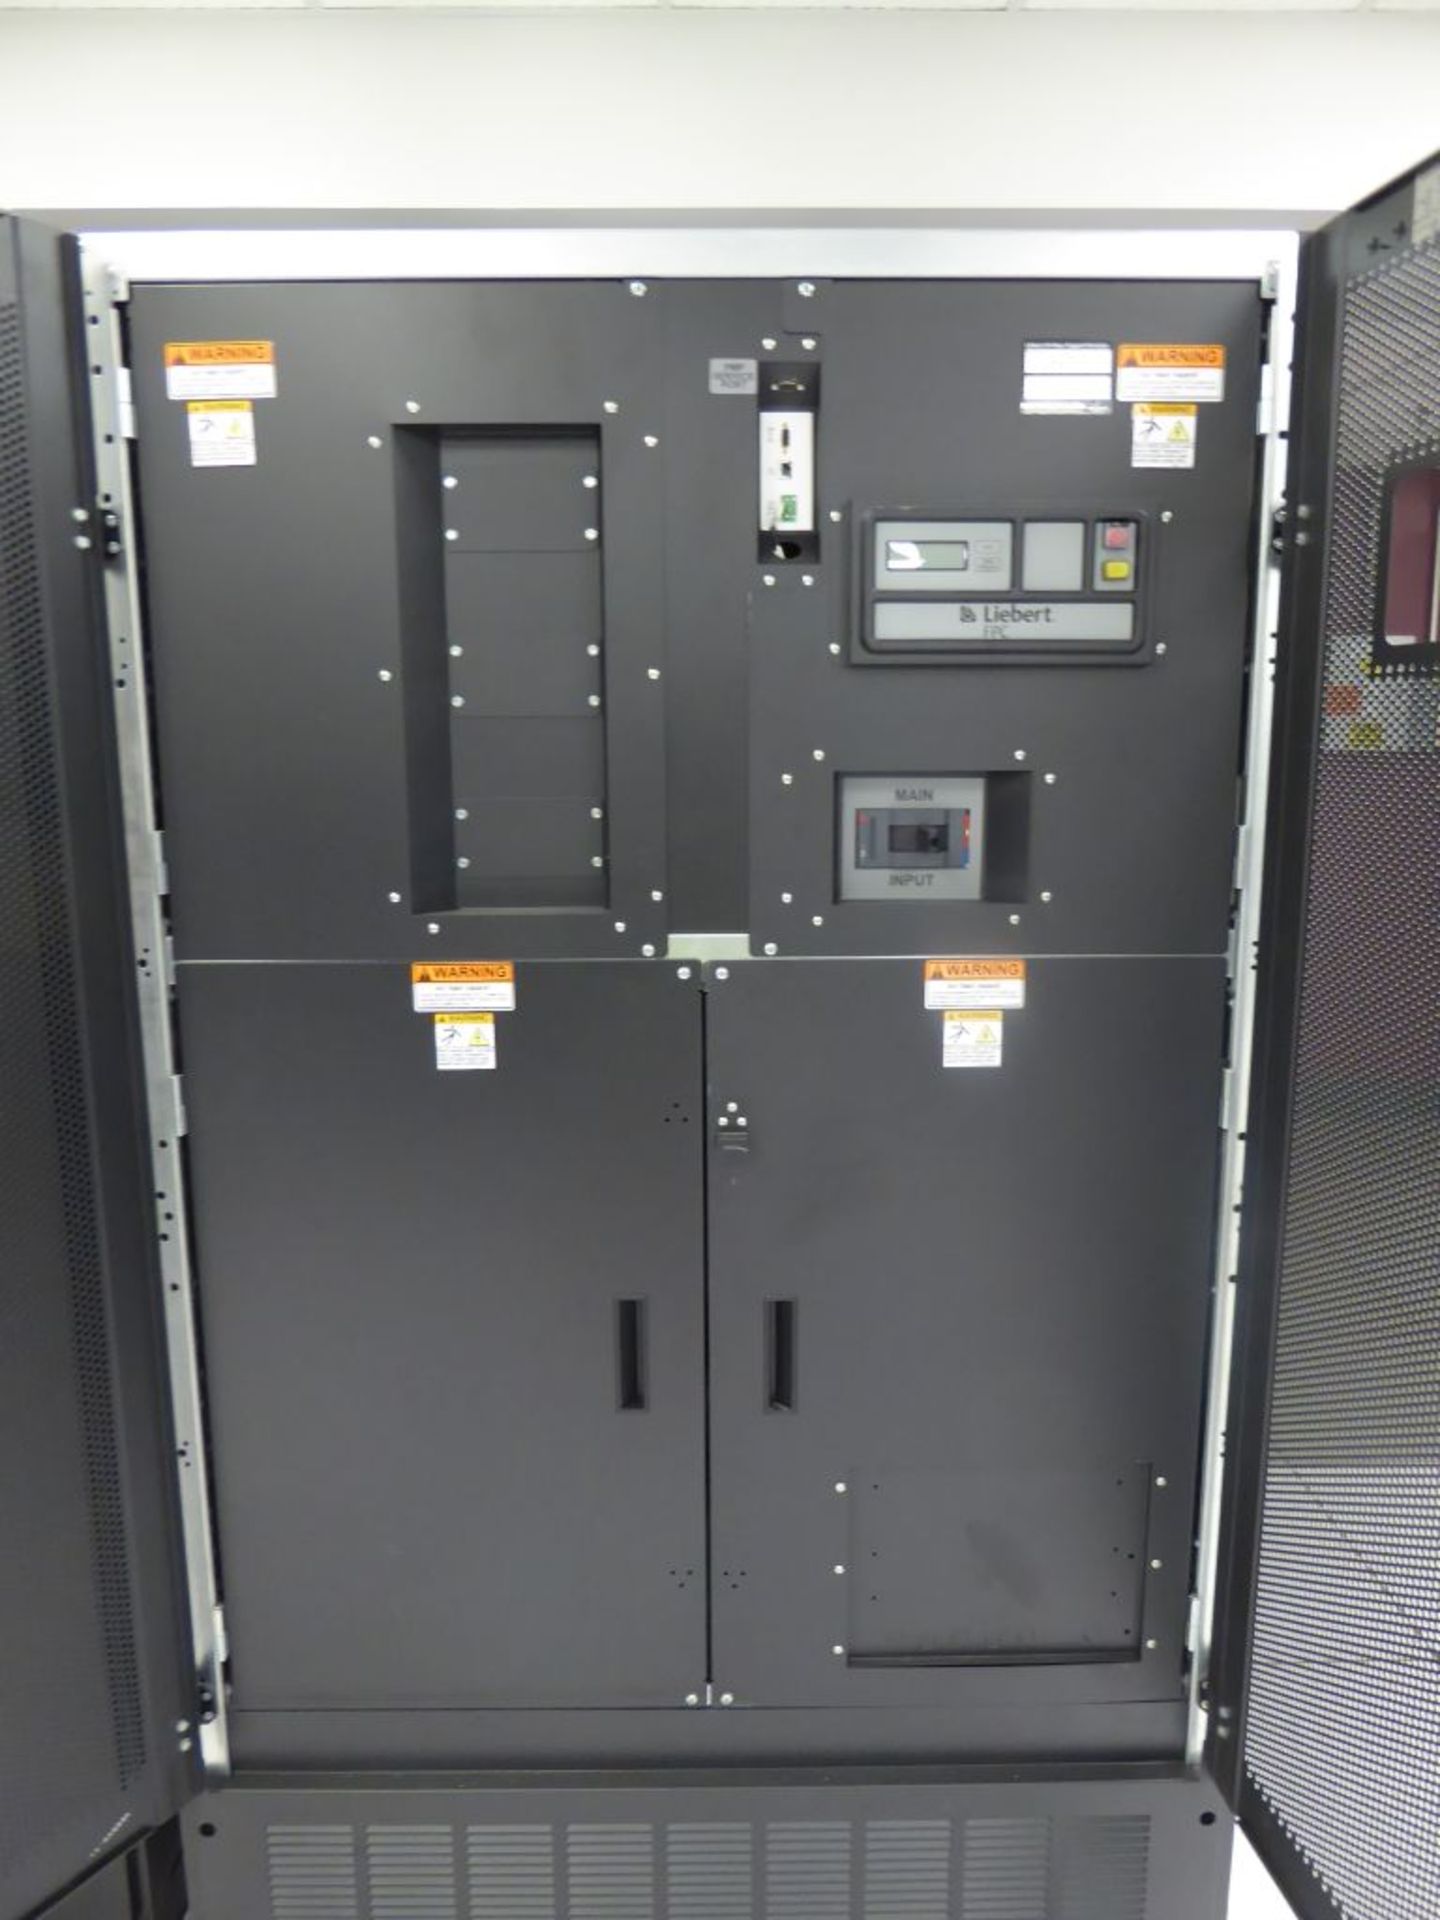 Spartanburg, SC - Liebert Cabinet with Square D I-Line Panelboard - Image 3 of 12